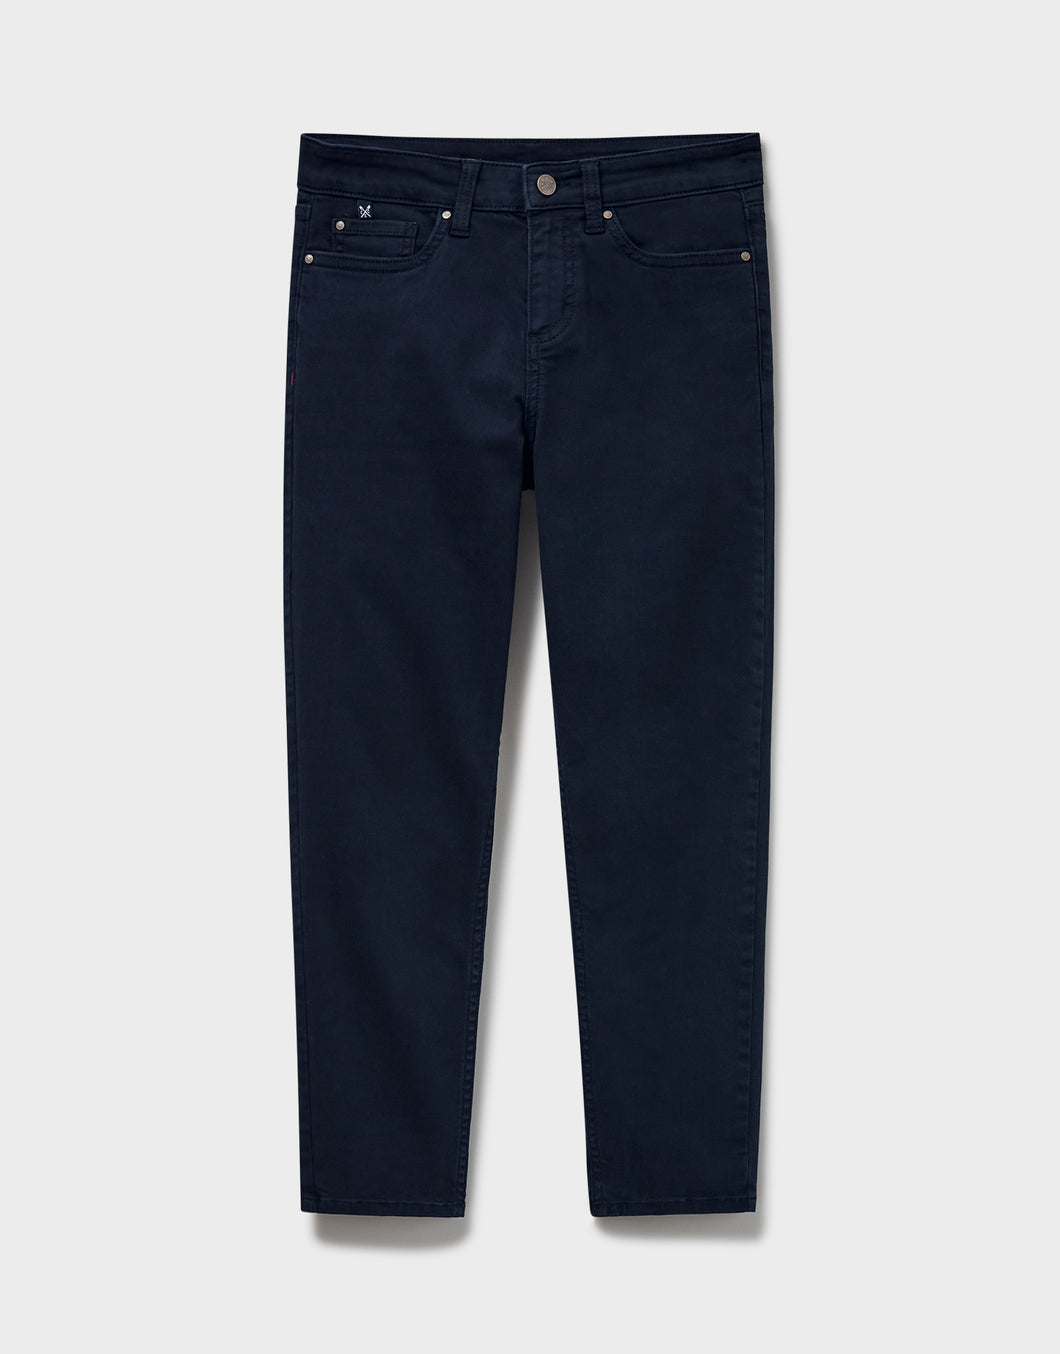 Crew Clothing - Cropped Jeans